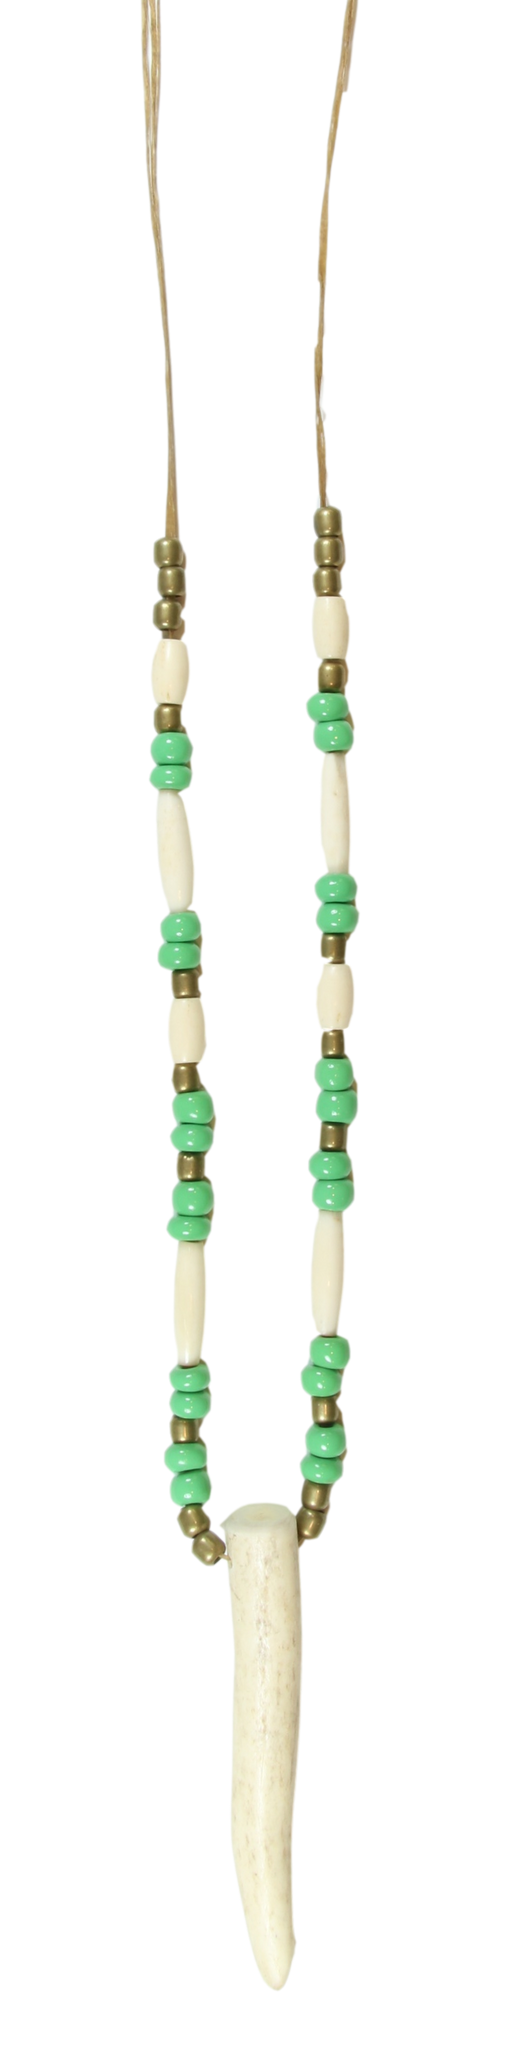 Necklace Deer Antler with Bone and Green Beads